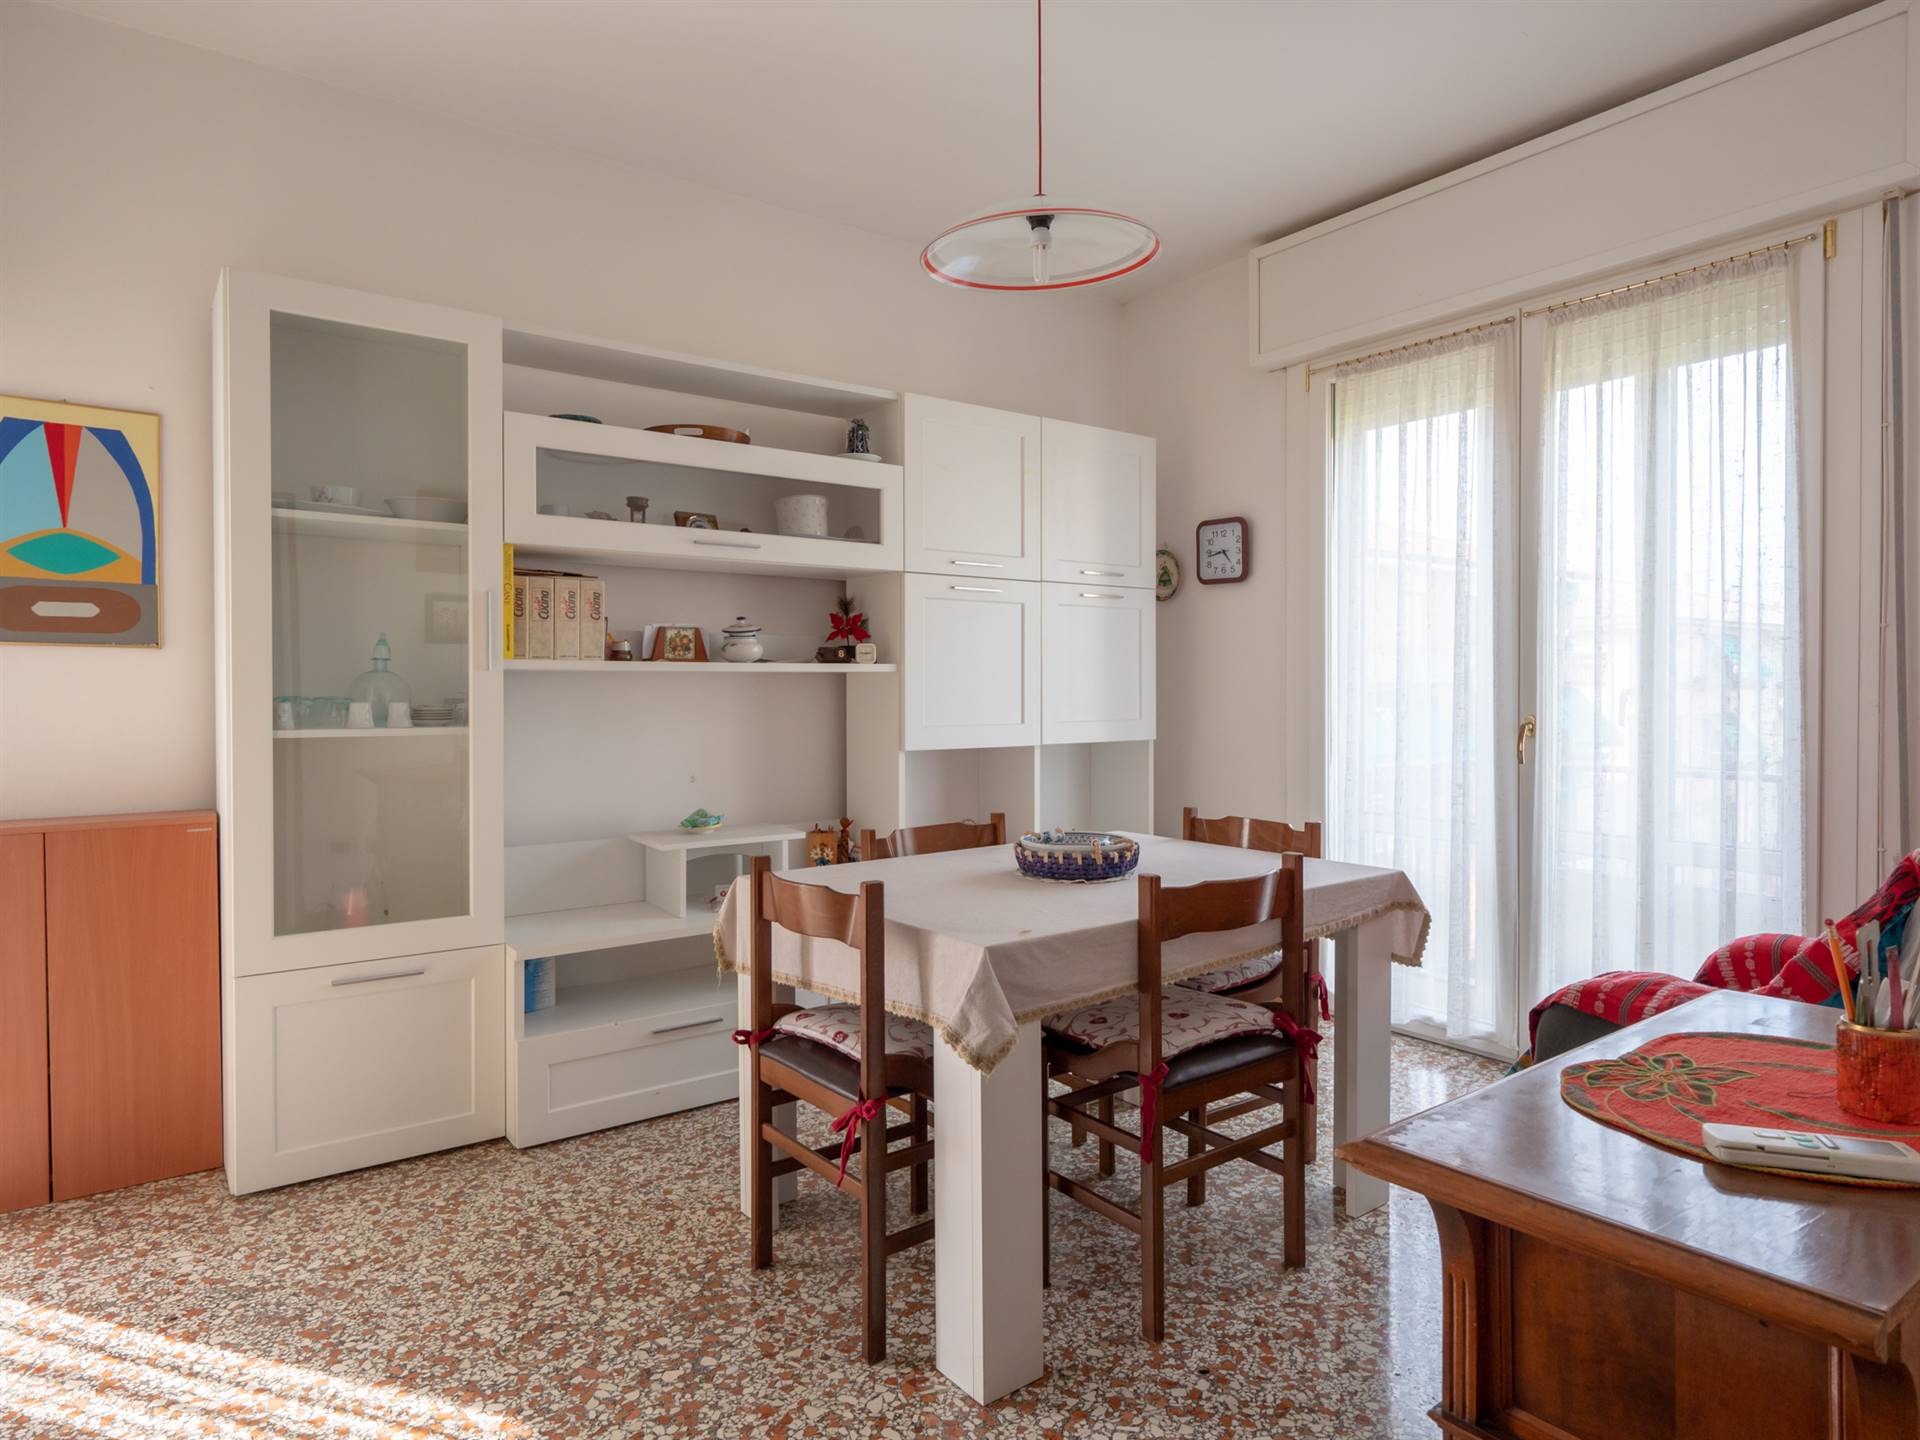 MESTRE, VENEZIA, Apartment for sale of 69 Sq. mt., Good condition, Heating Individual heating system, Energetic class: G, placed at 3° on 3, composed 